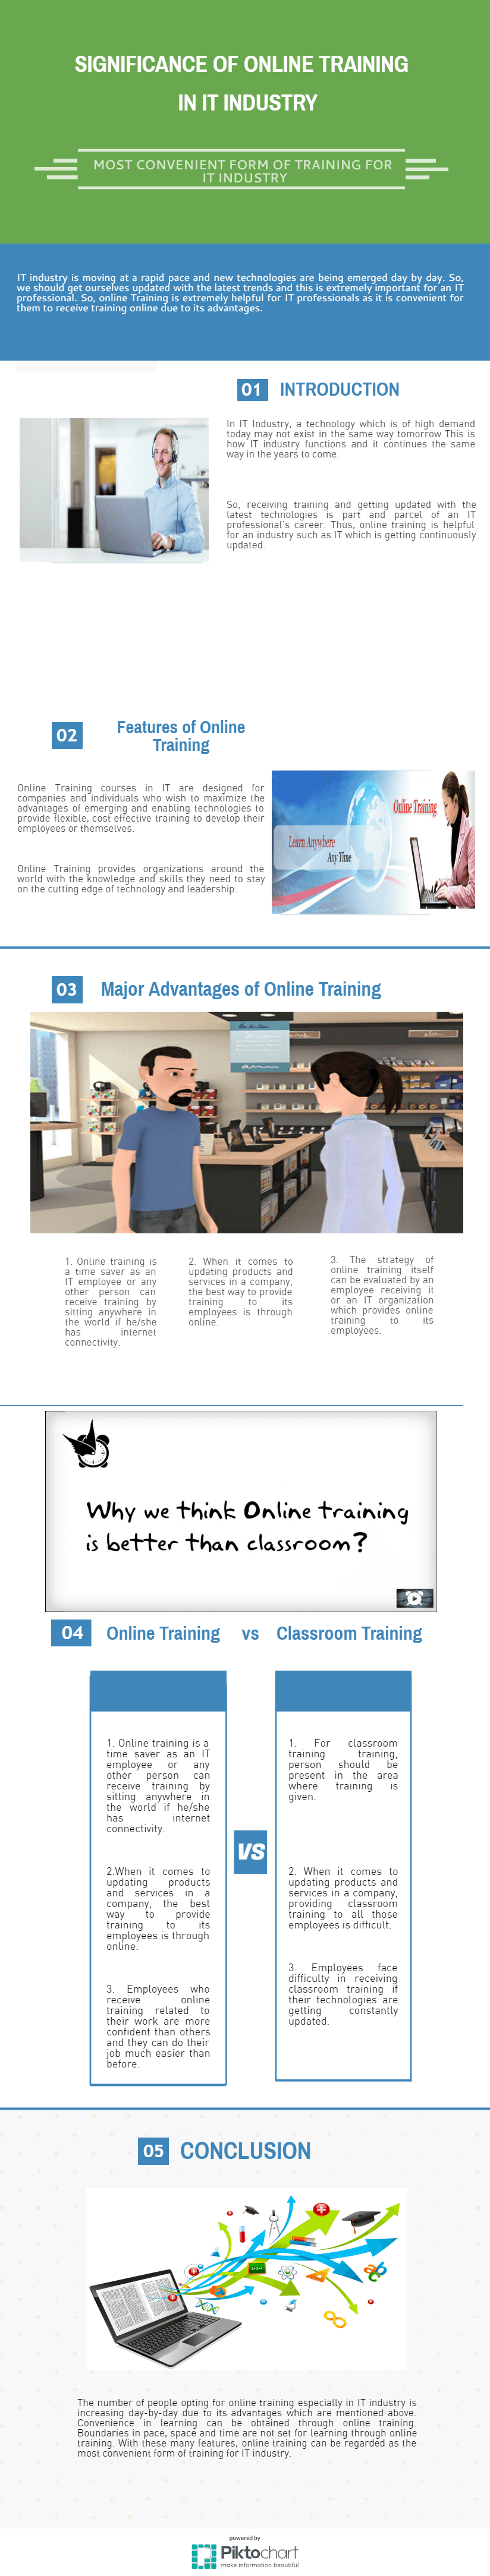 The Significance of Online Training in IT Industry Infographic